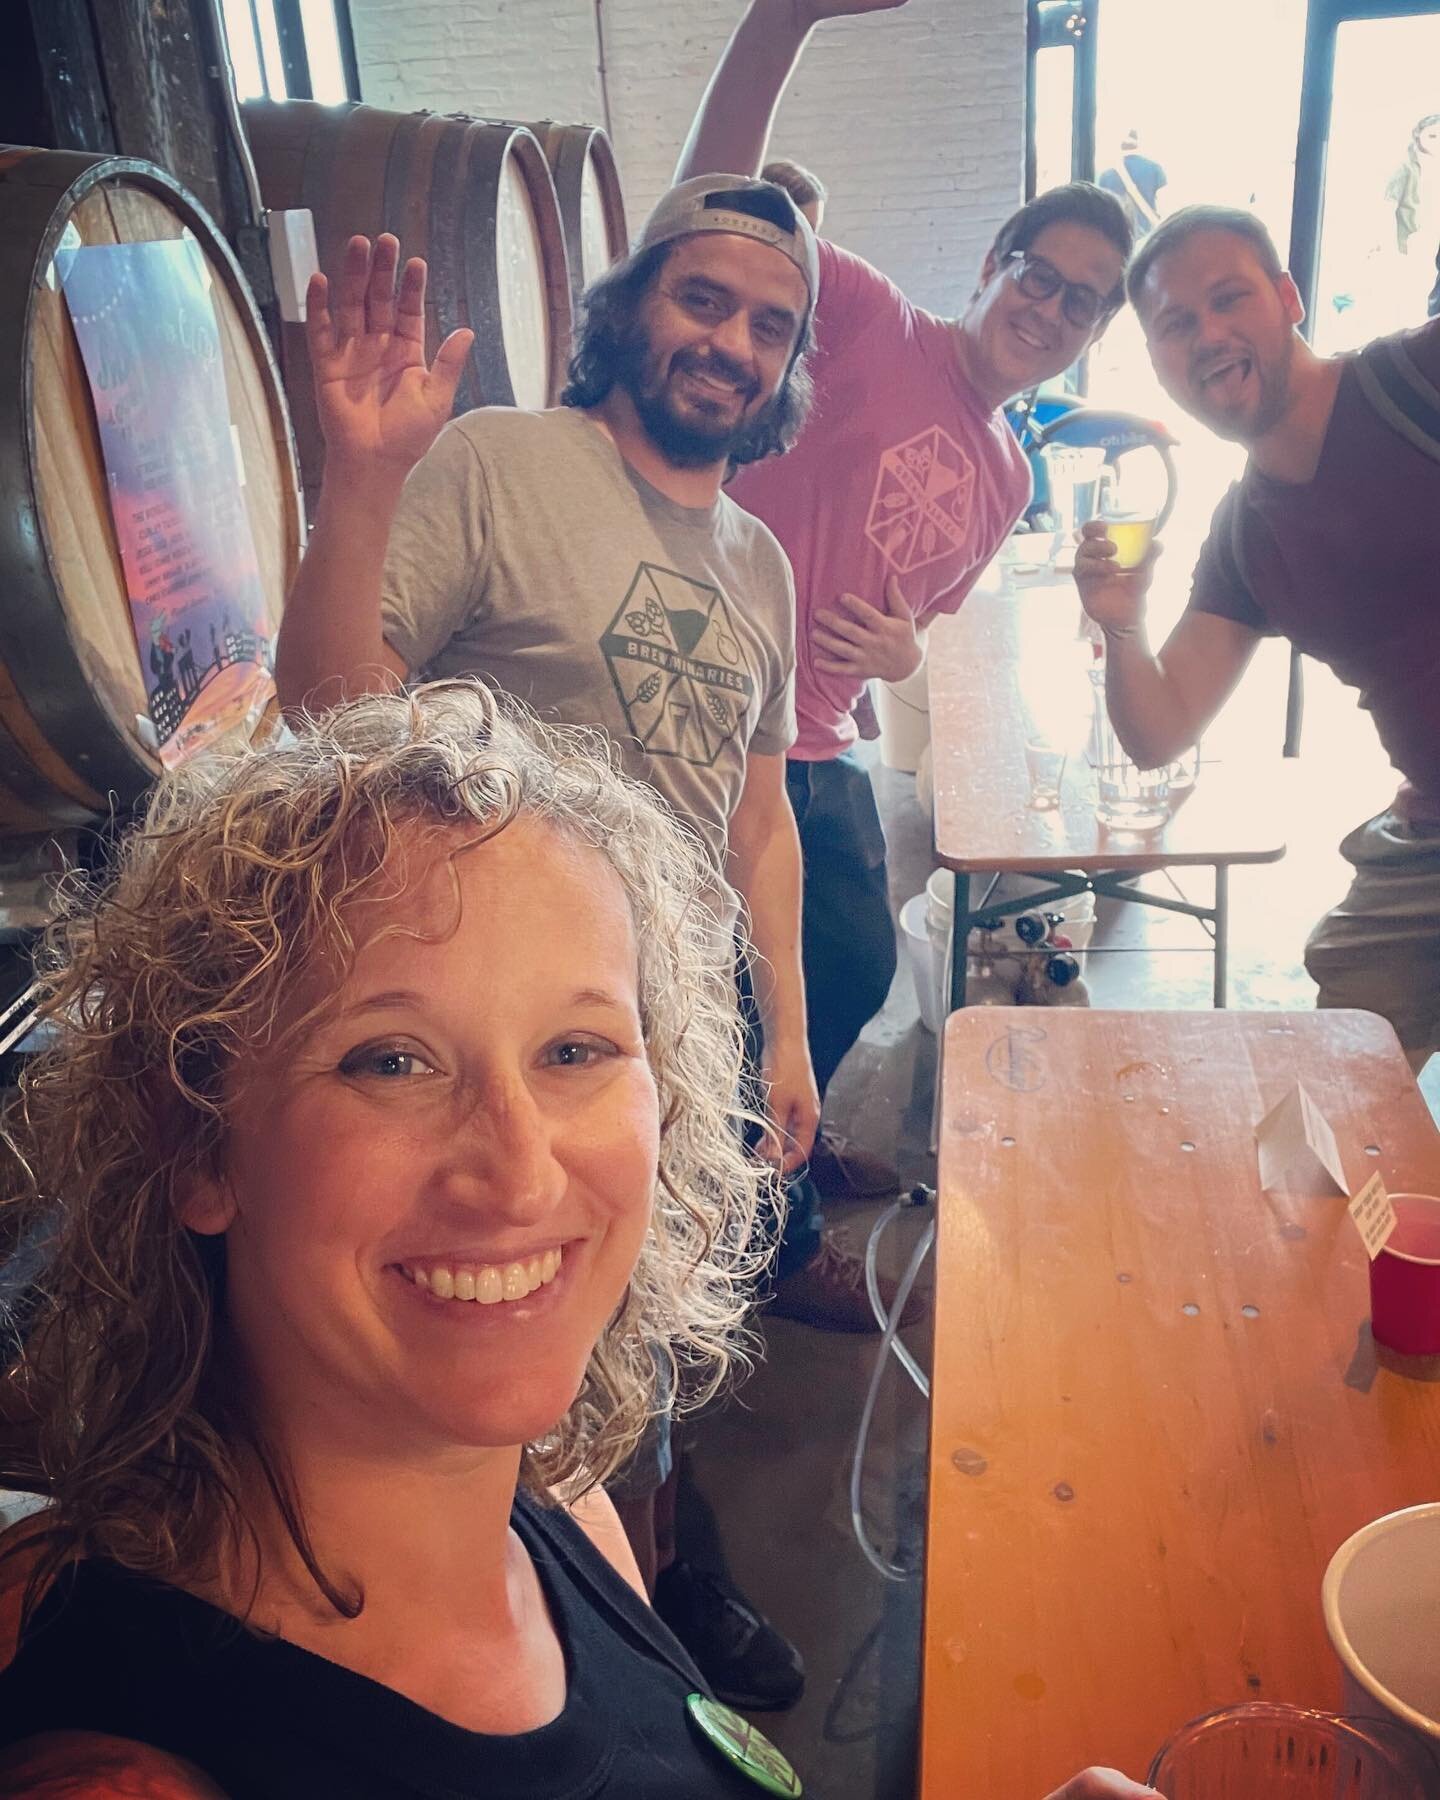 Brewmies @colleendarvy, @boroughbees, and @pacobw at @strongropebrewery Red Hook for yesterday&rsquo;s Imagined Futures event! Tim and Colleen took home third and second place best of show respectively! Congrats!
&bull;
#beer #craftbeer #brewminaries